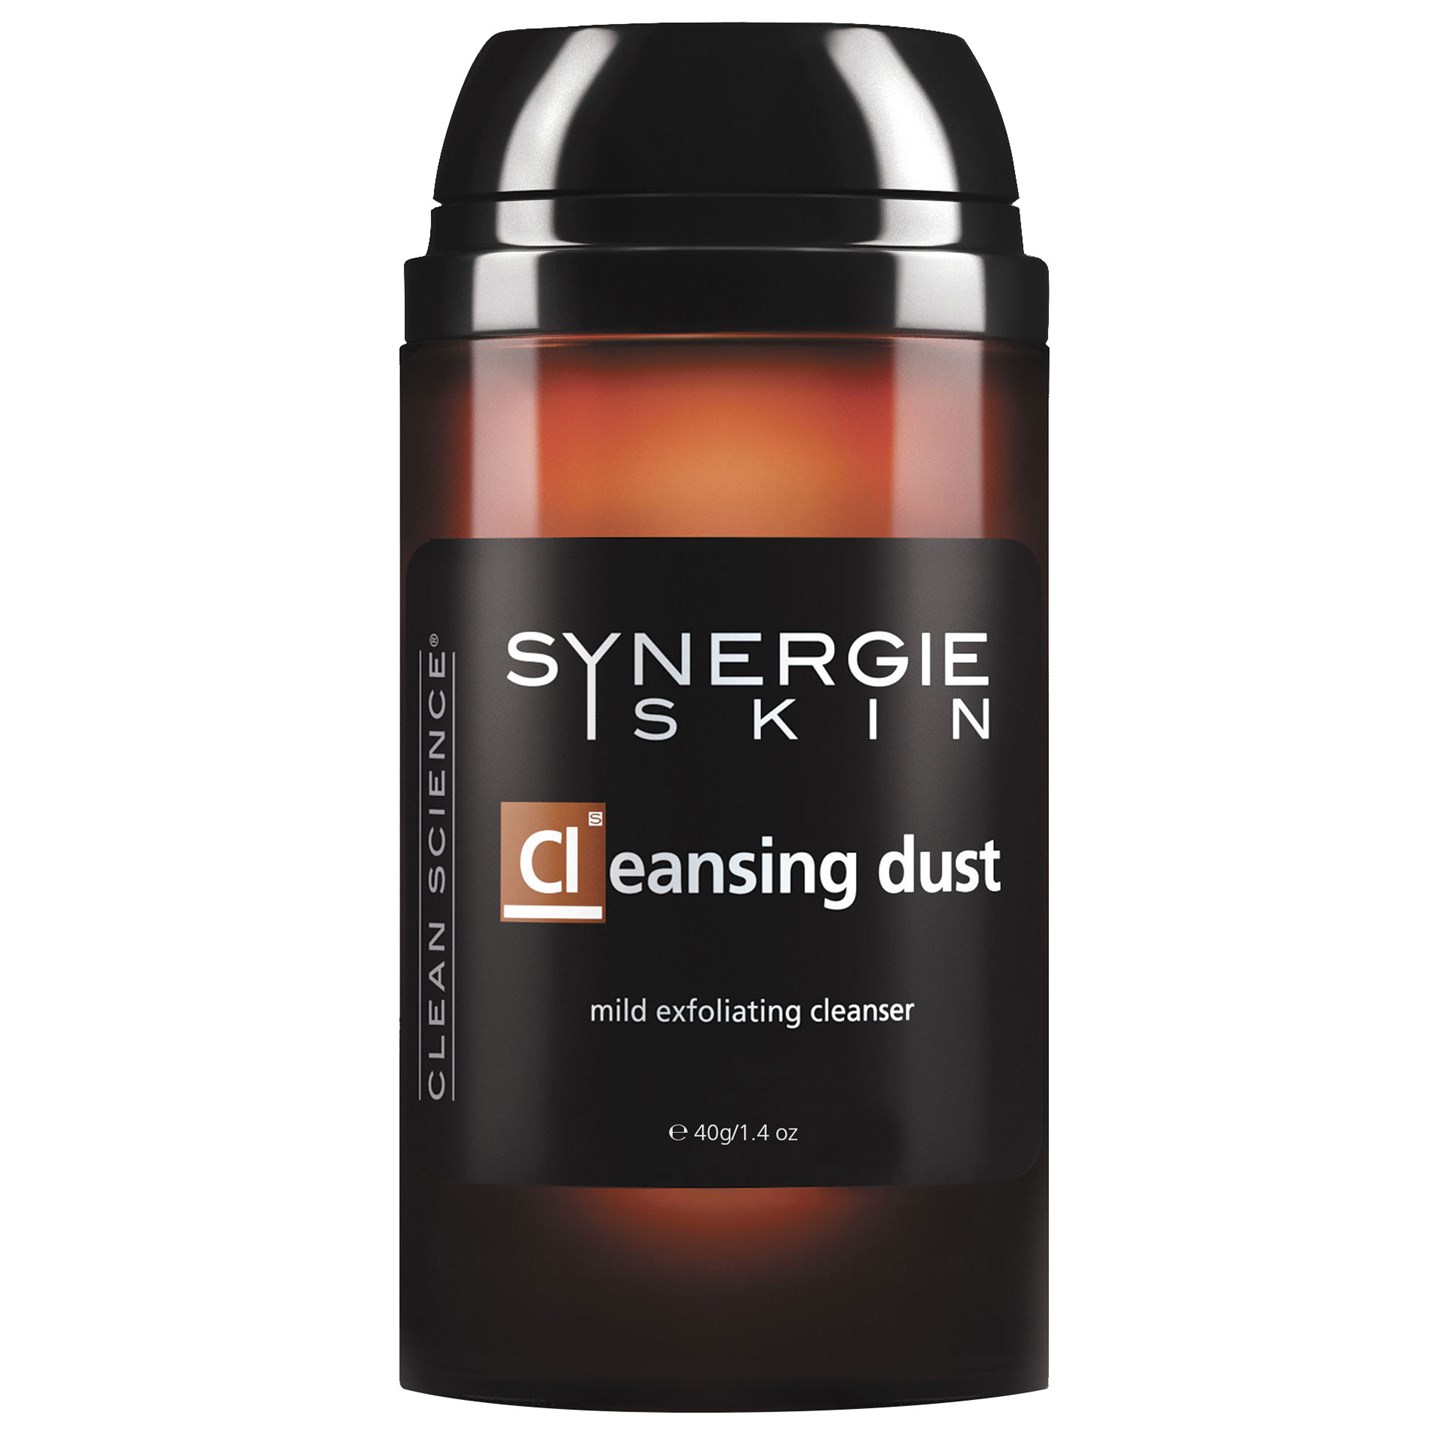 Synergie Skin Cleansing Dust